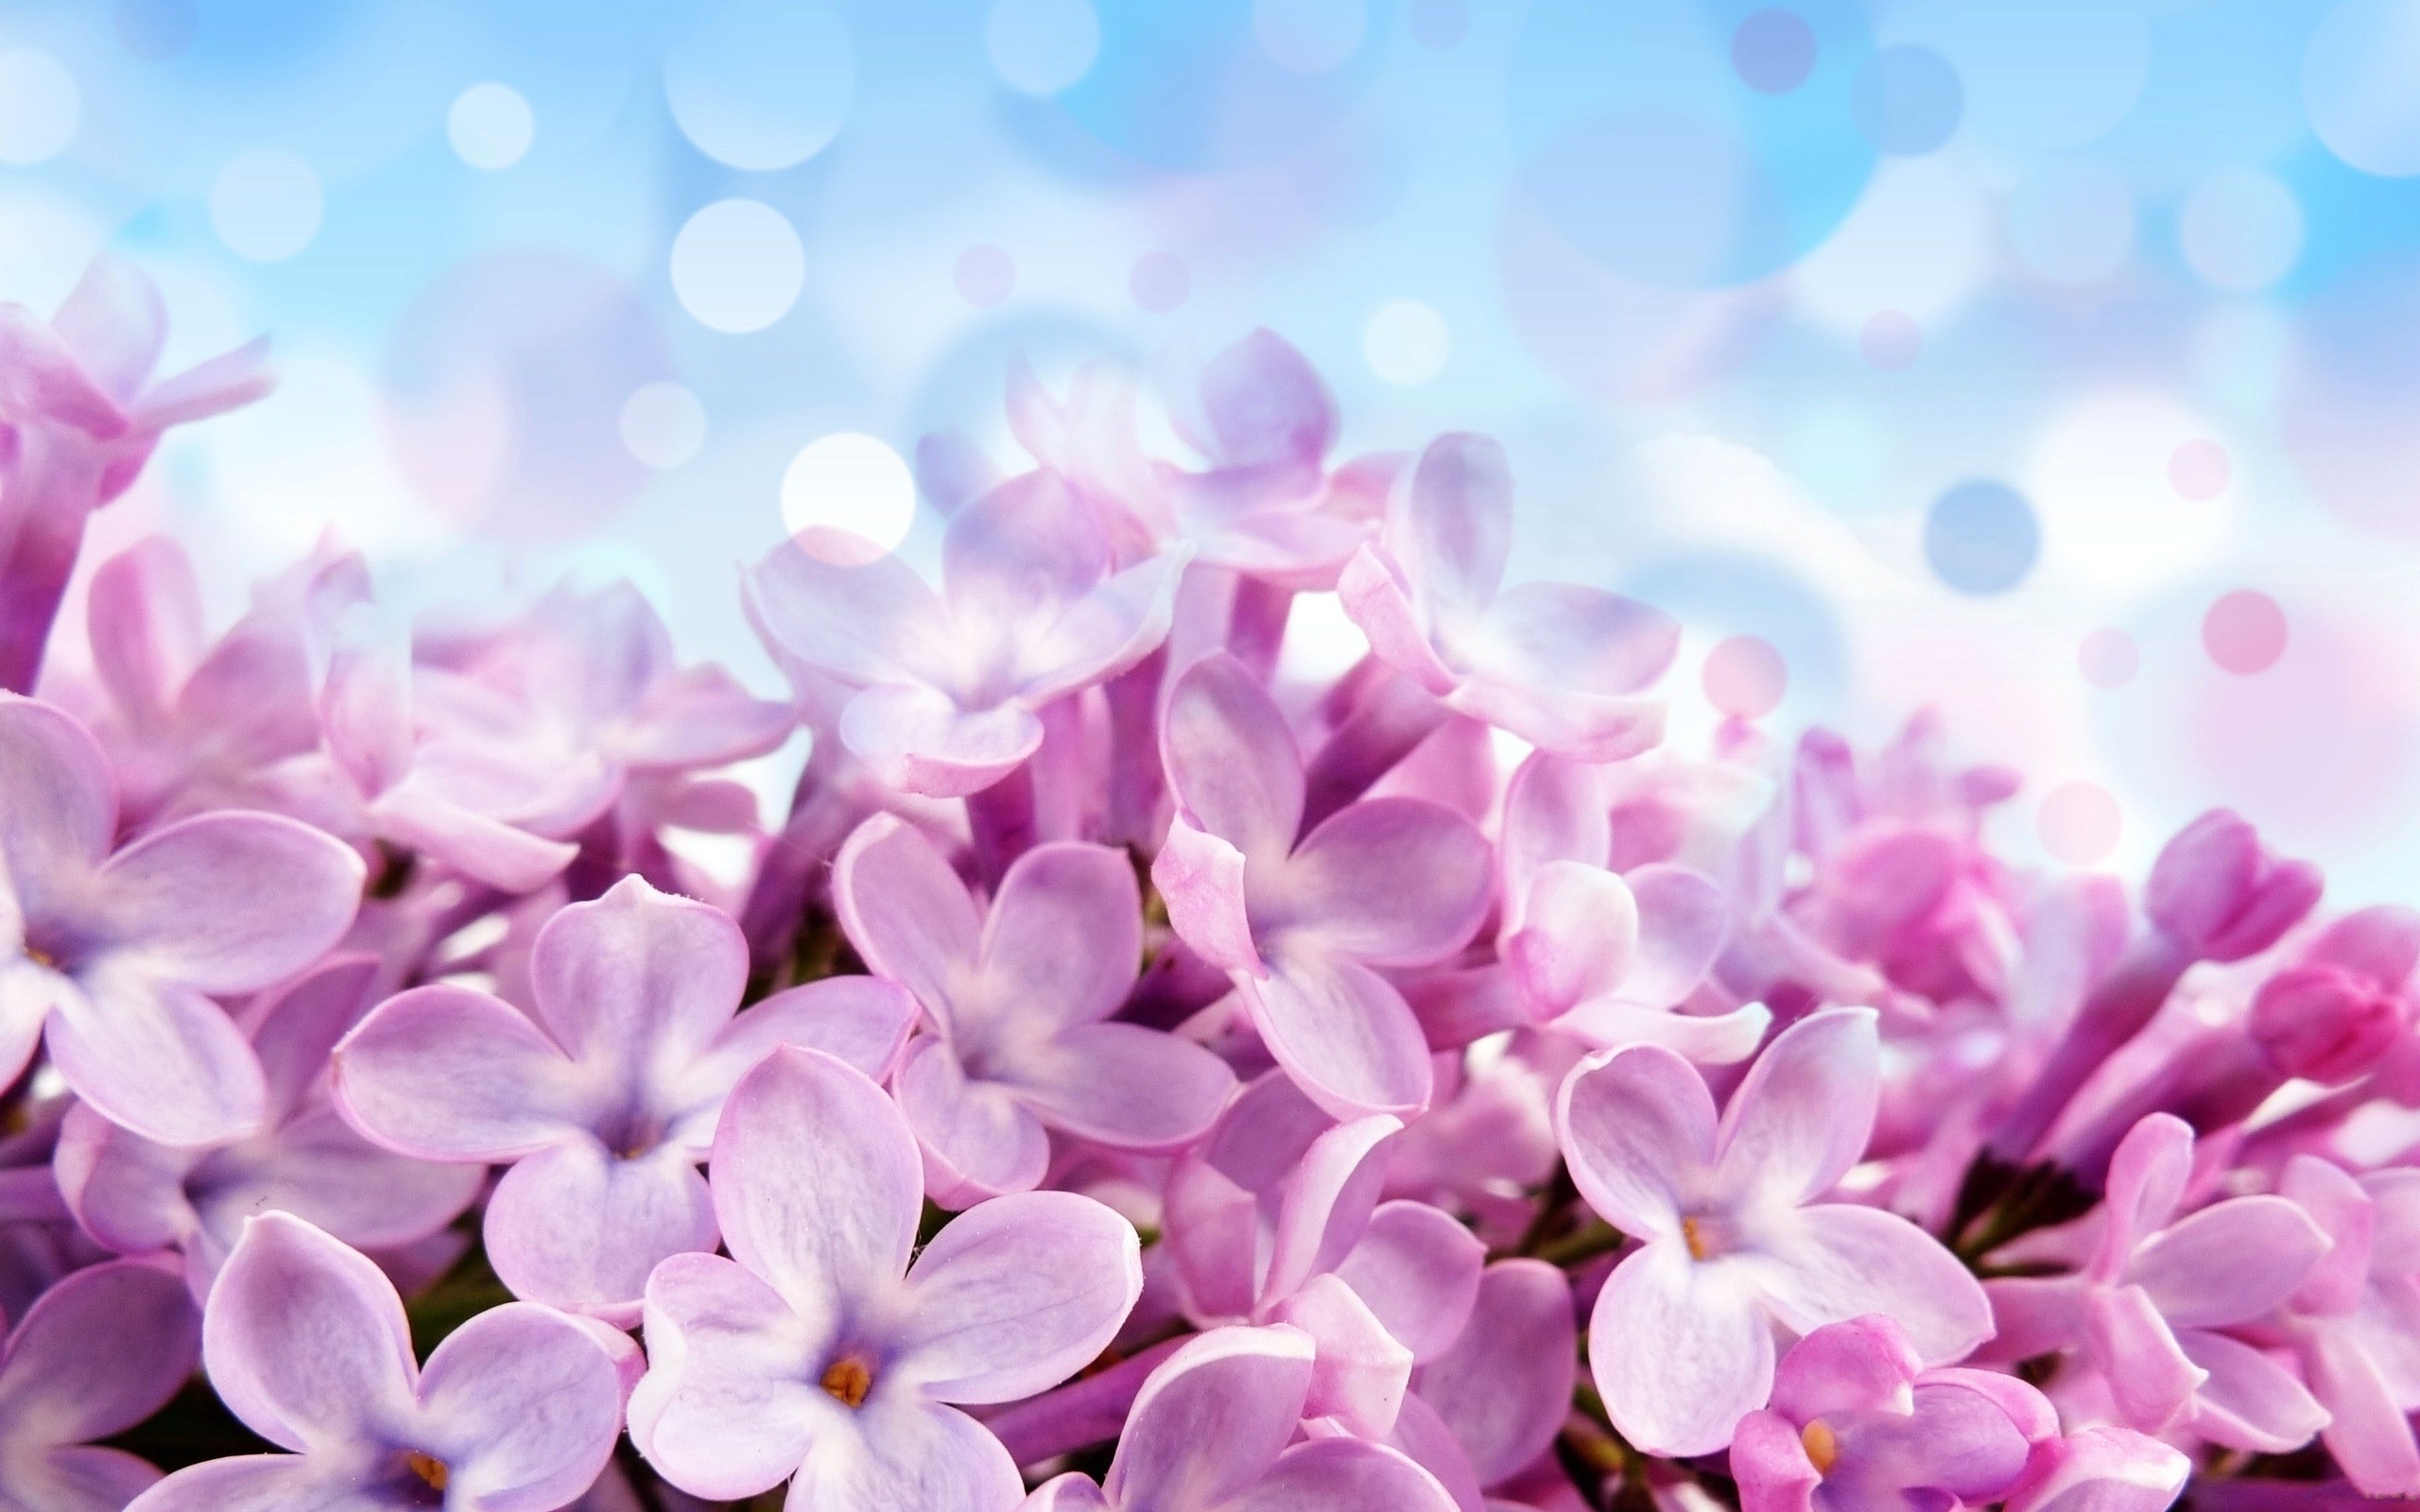 General 2560x1600 pink flowers flowers petals photography photo manipulation plants nature